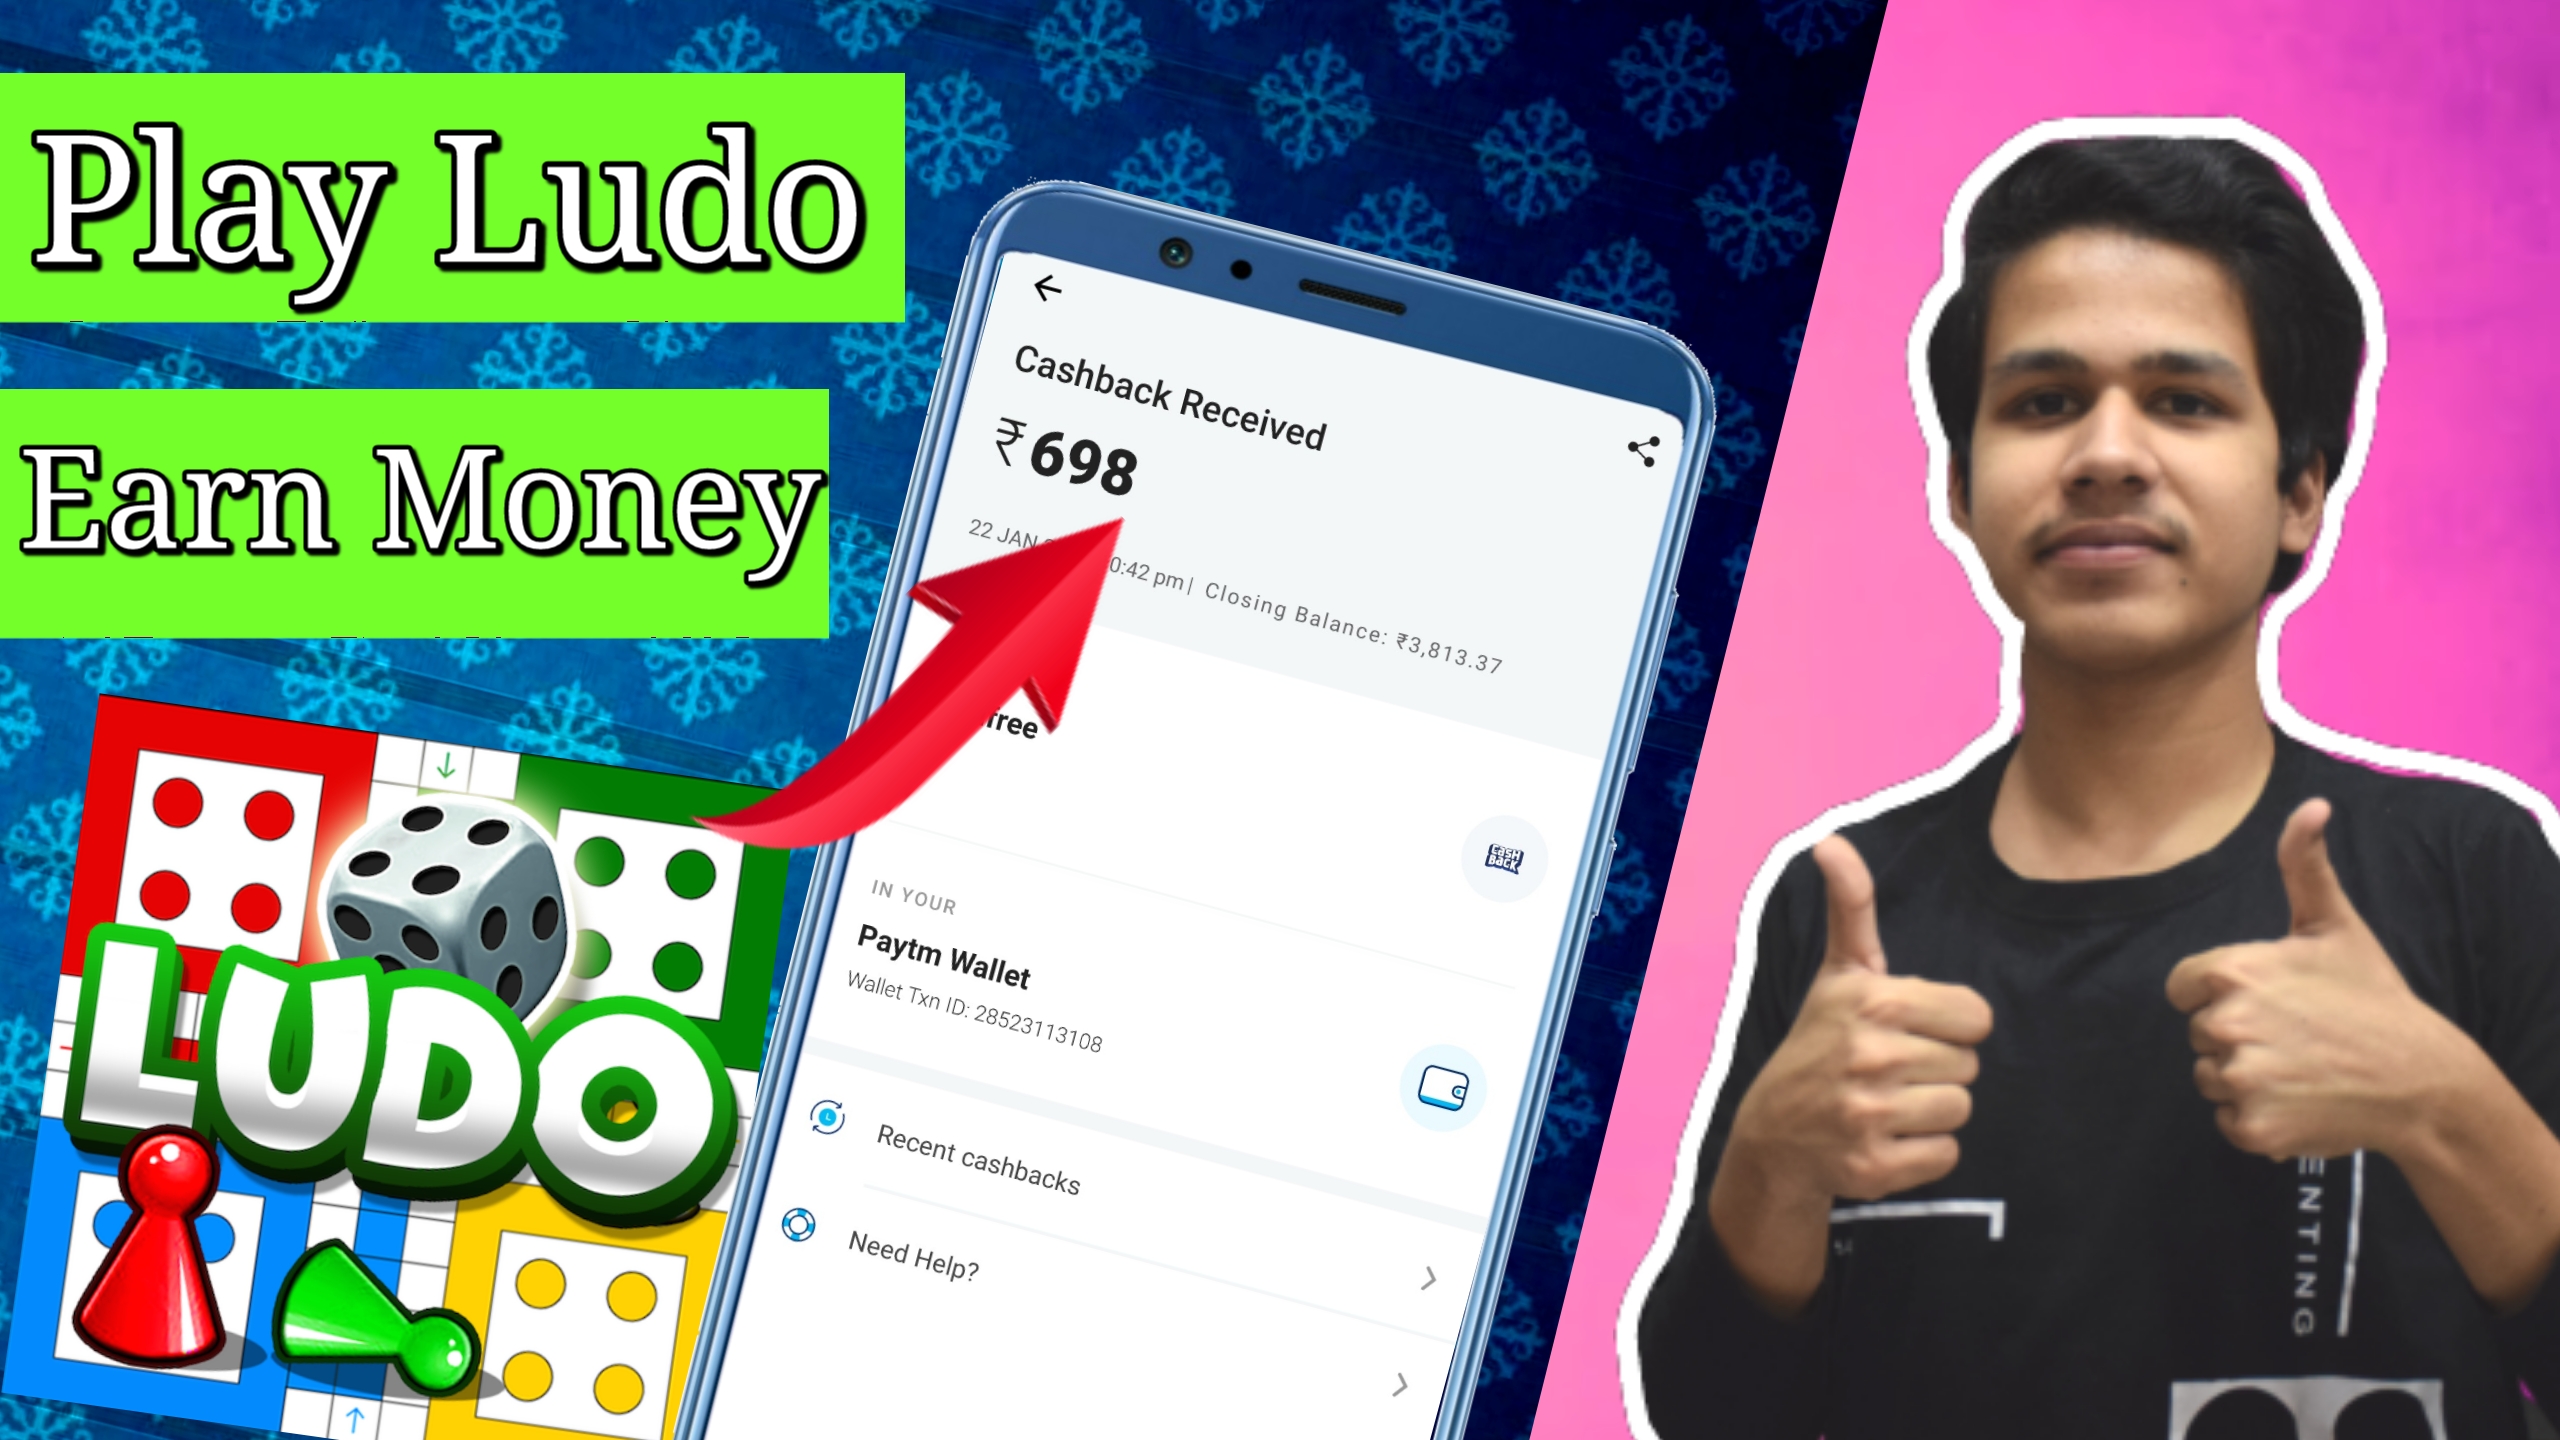 Play ludo and win money